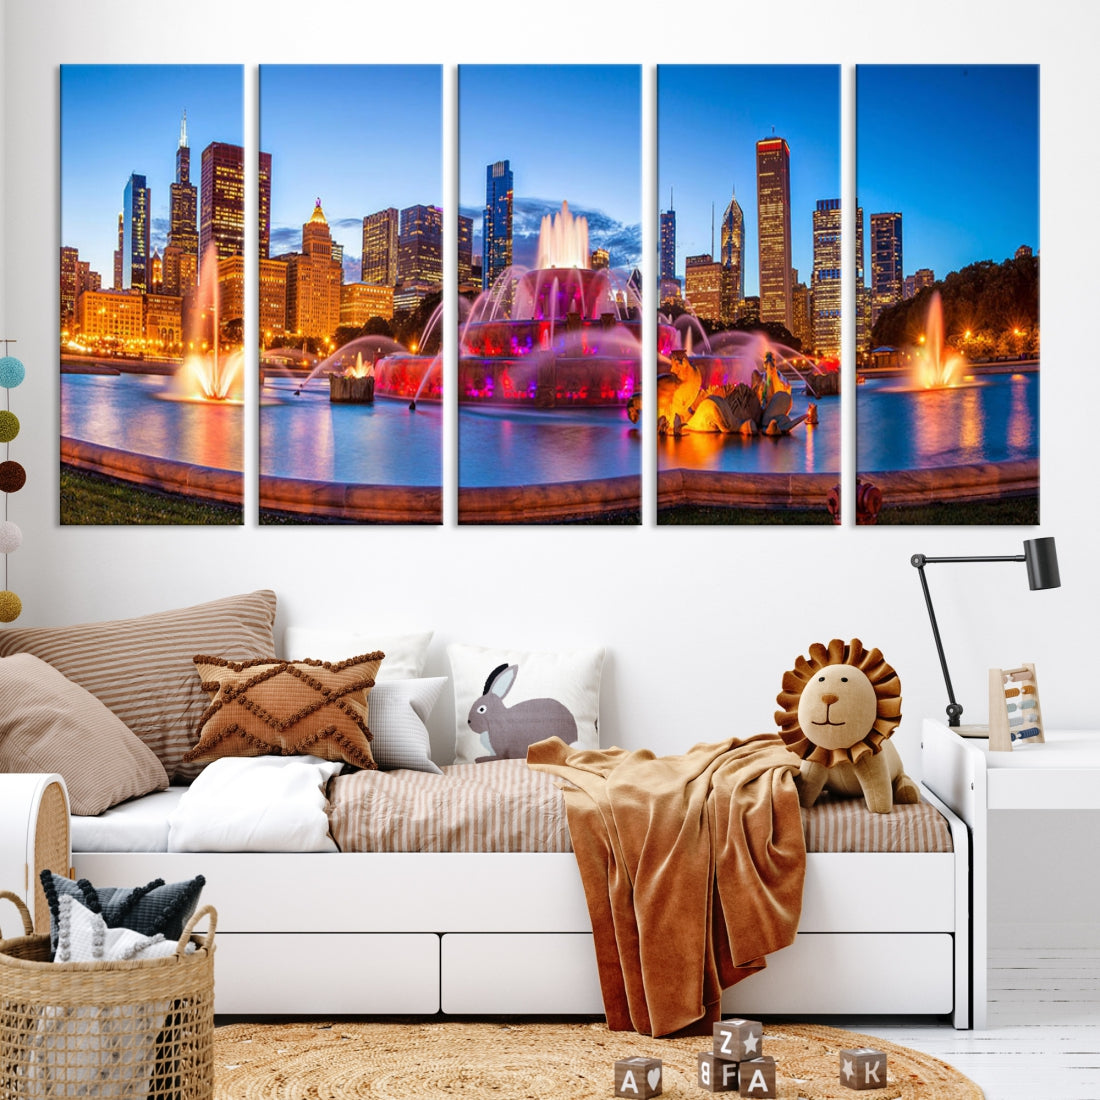 Chicago City Colorful Lights Night Skyline Cityscape View Large Wall Art Canvas Print